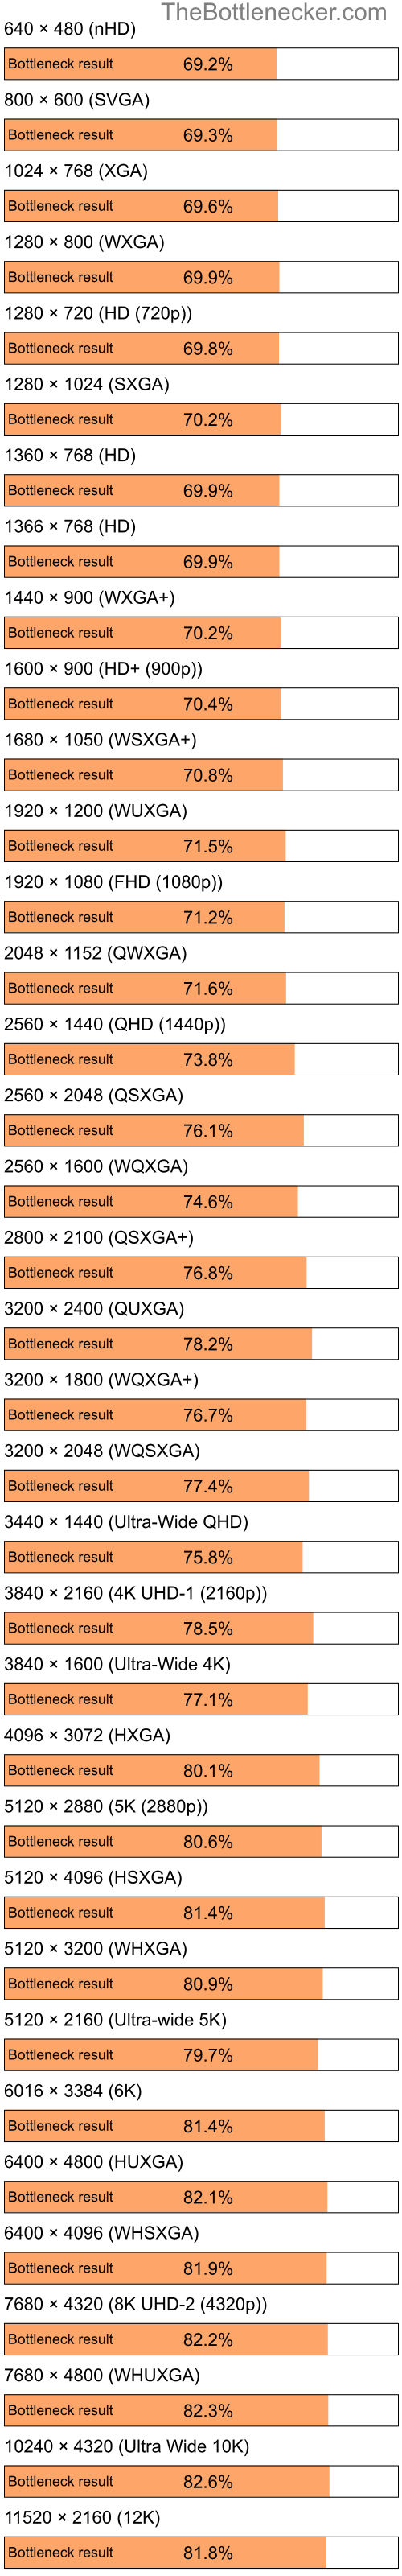 Bottleneck results by resolution for Intel Atom N280 and AMD Mobility Radeon X1400 in Processor Intense Tasks